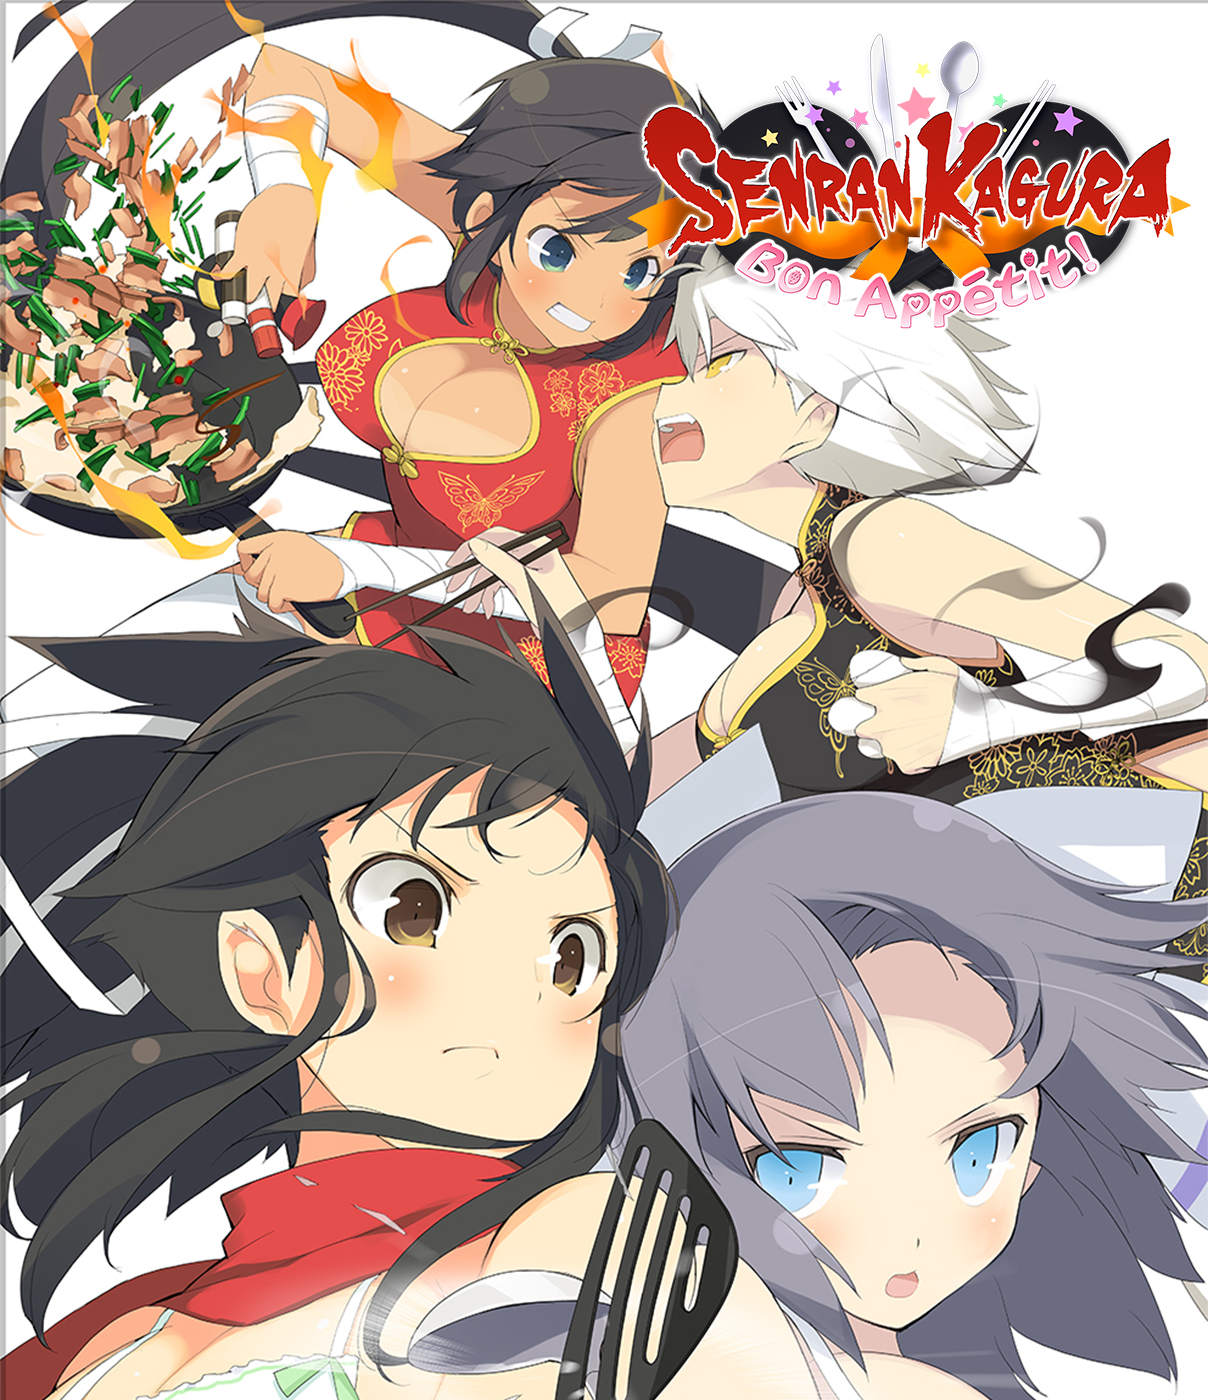 Senran Kagura: Bon Appétit! is a rhythm cooking game available for the PlayStation Vita, in which the goal is to win a cooking competition. The game was released on the PlayStation Store on November 11, 2014 for North America, and on November 12, 2014 for Europe.